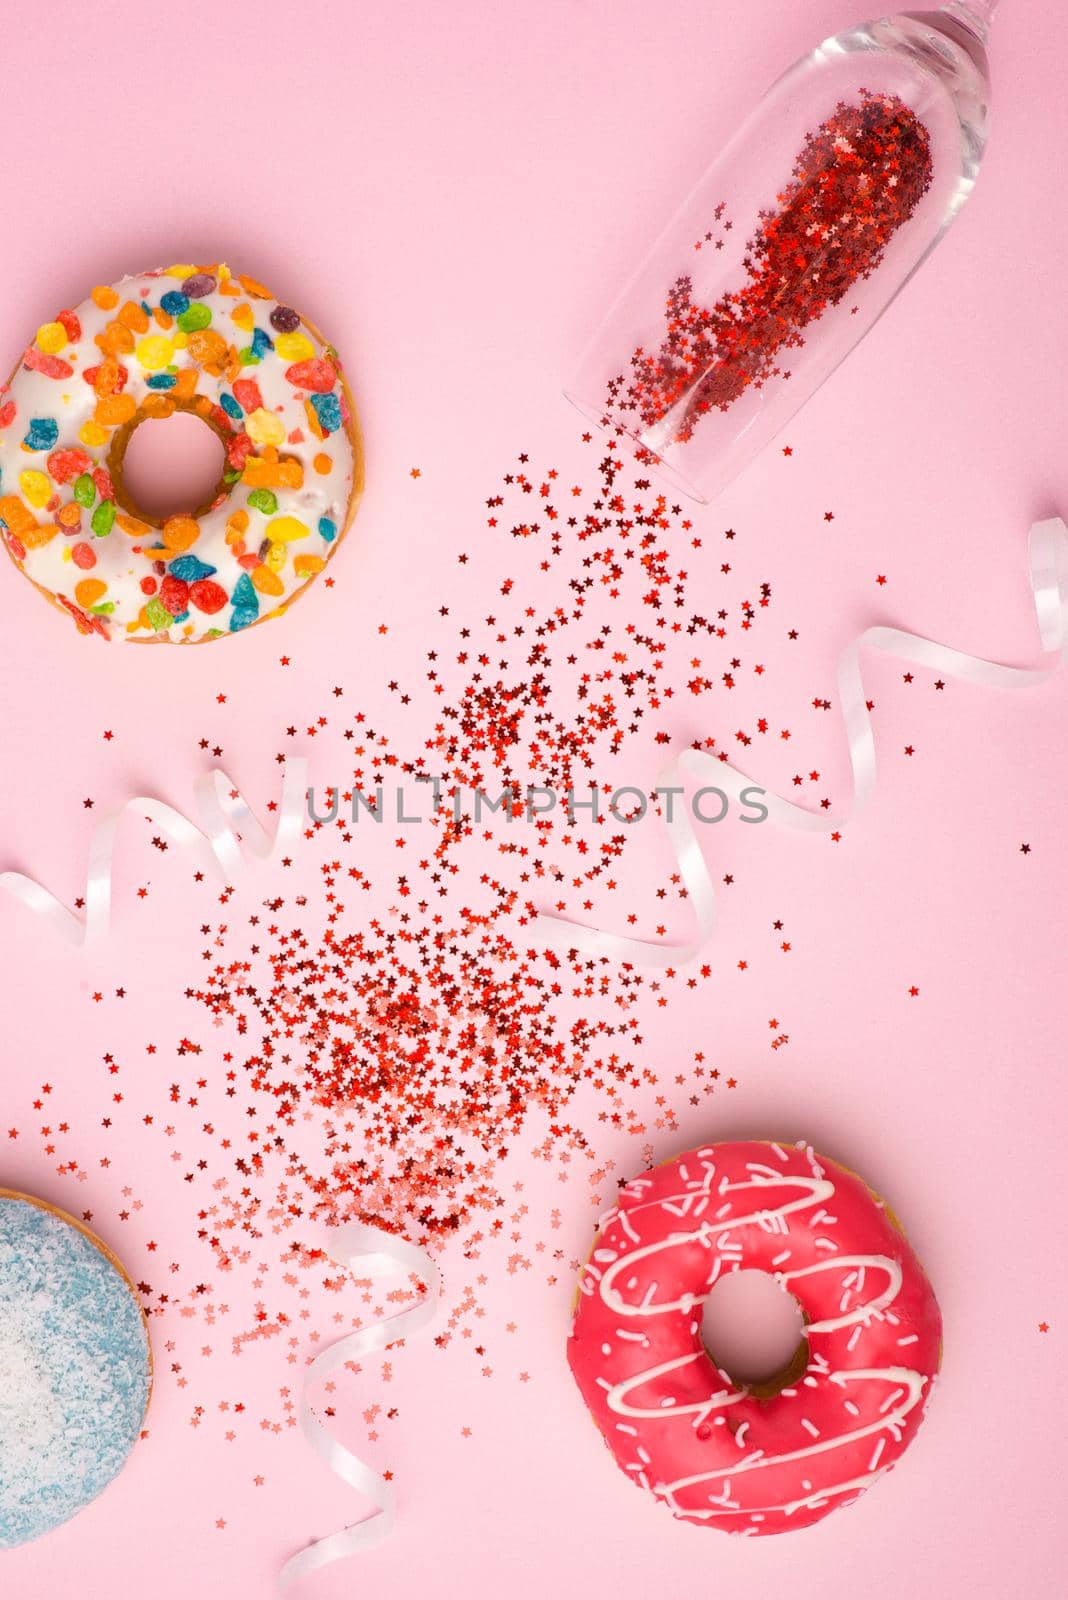 Flat lay of Celebration. Champagne glass with colorful party streamers and delicious donuts on pink background.